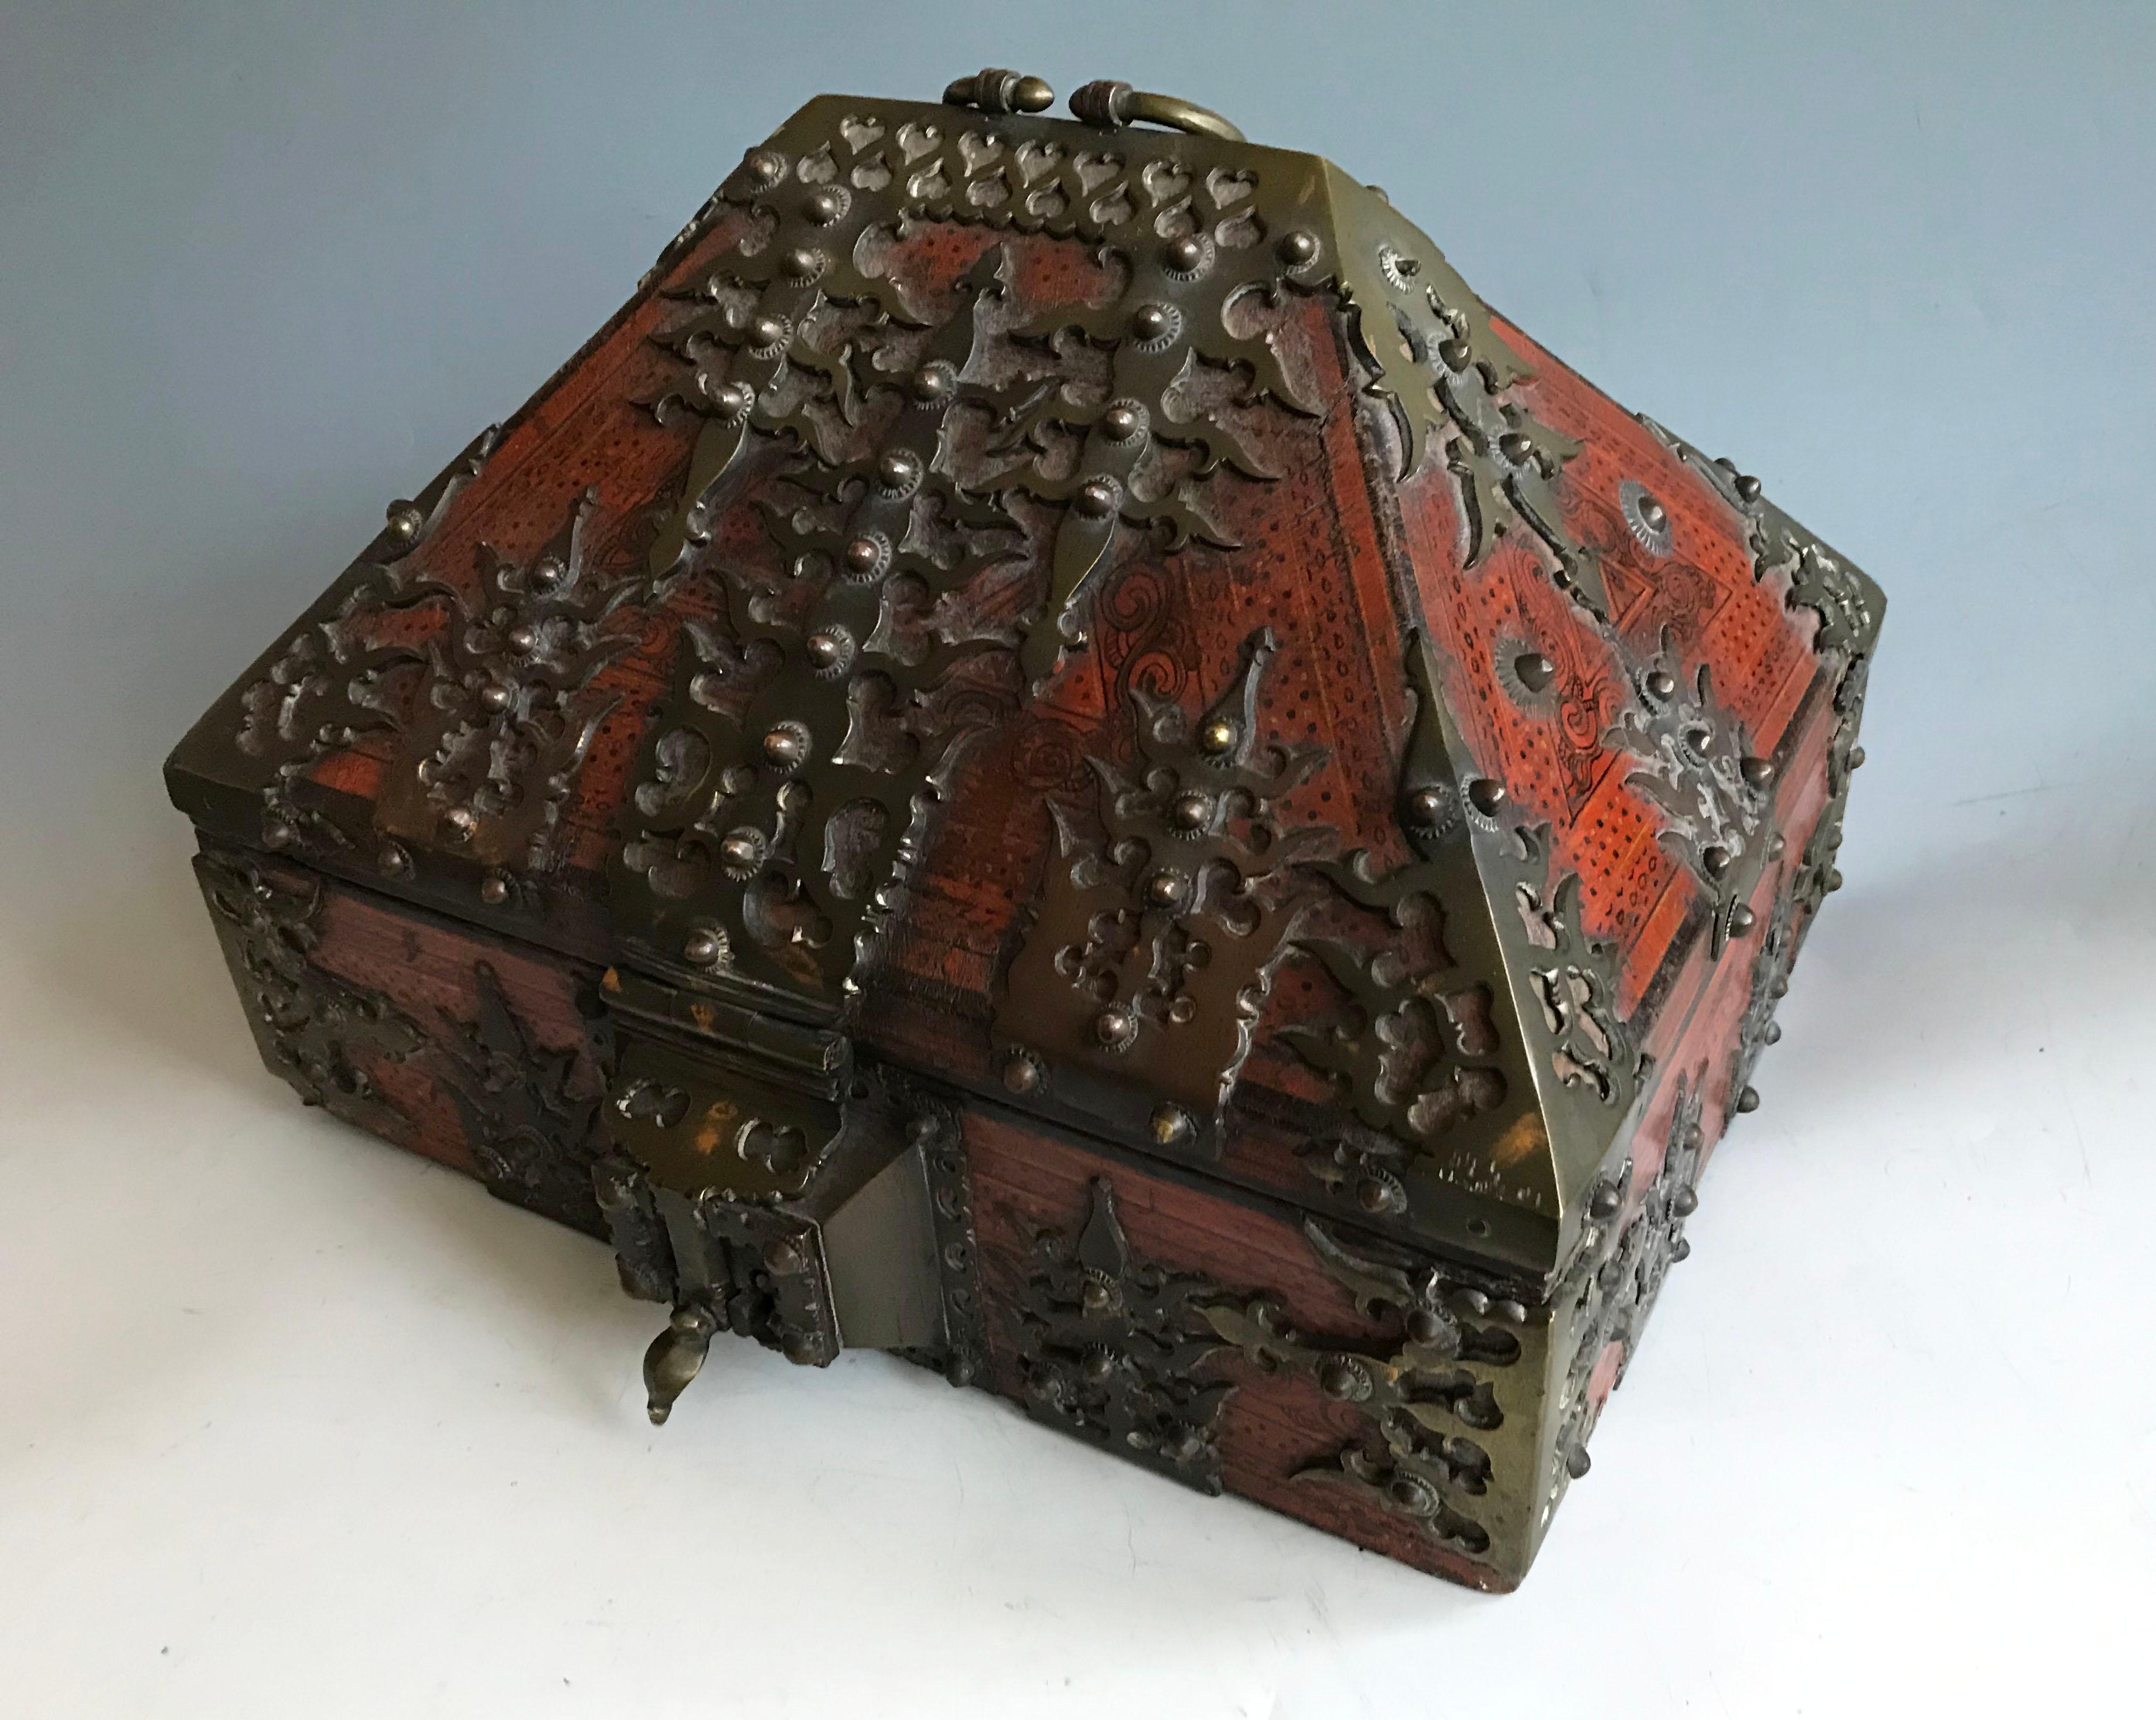 Superb Antique South Indian Kerala dowry box Interior Design Antiques Gifts
A Superb large 19th South Indian Kerala dowry box. Profusely decorated with lacquer  with pyramid form lid,  This example shows a vast amount of patinated brass